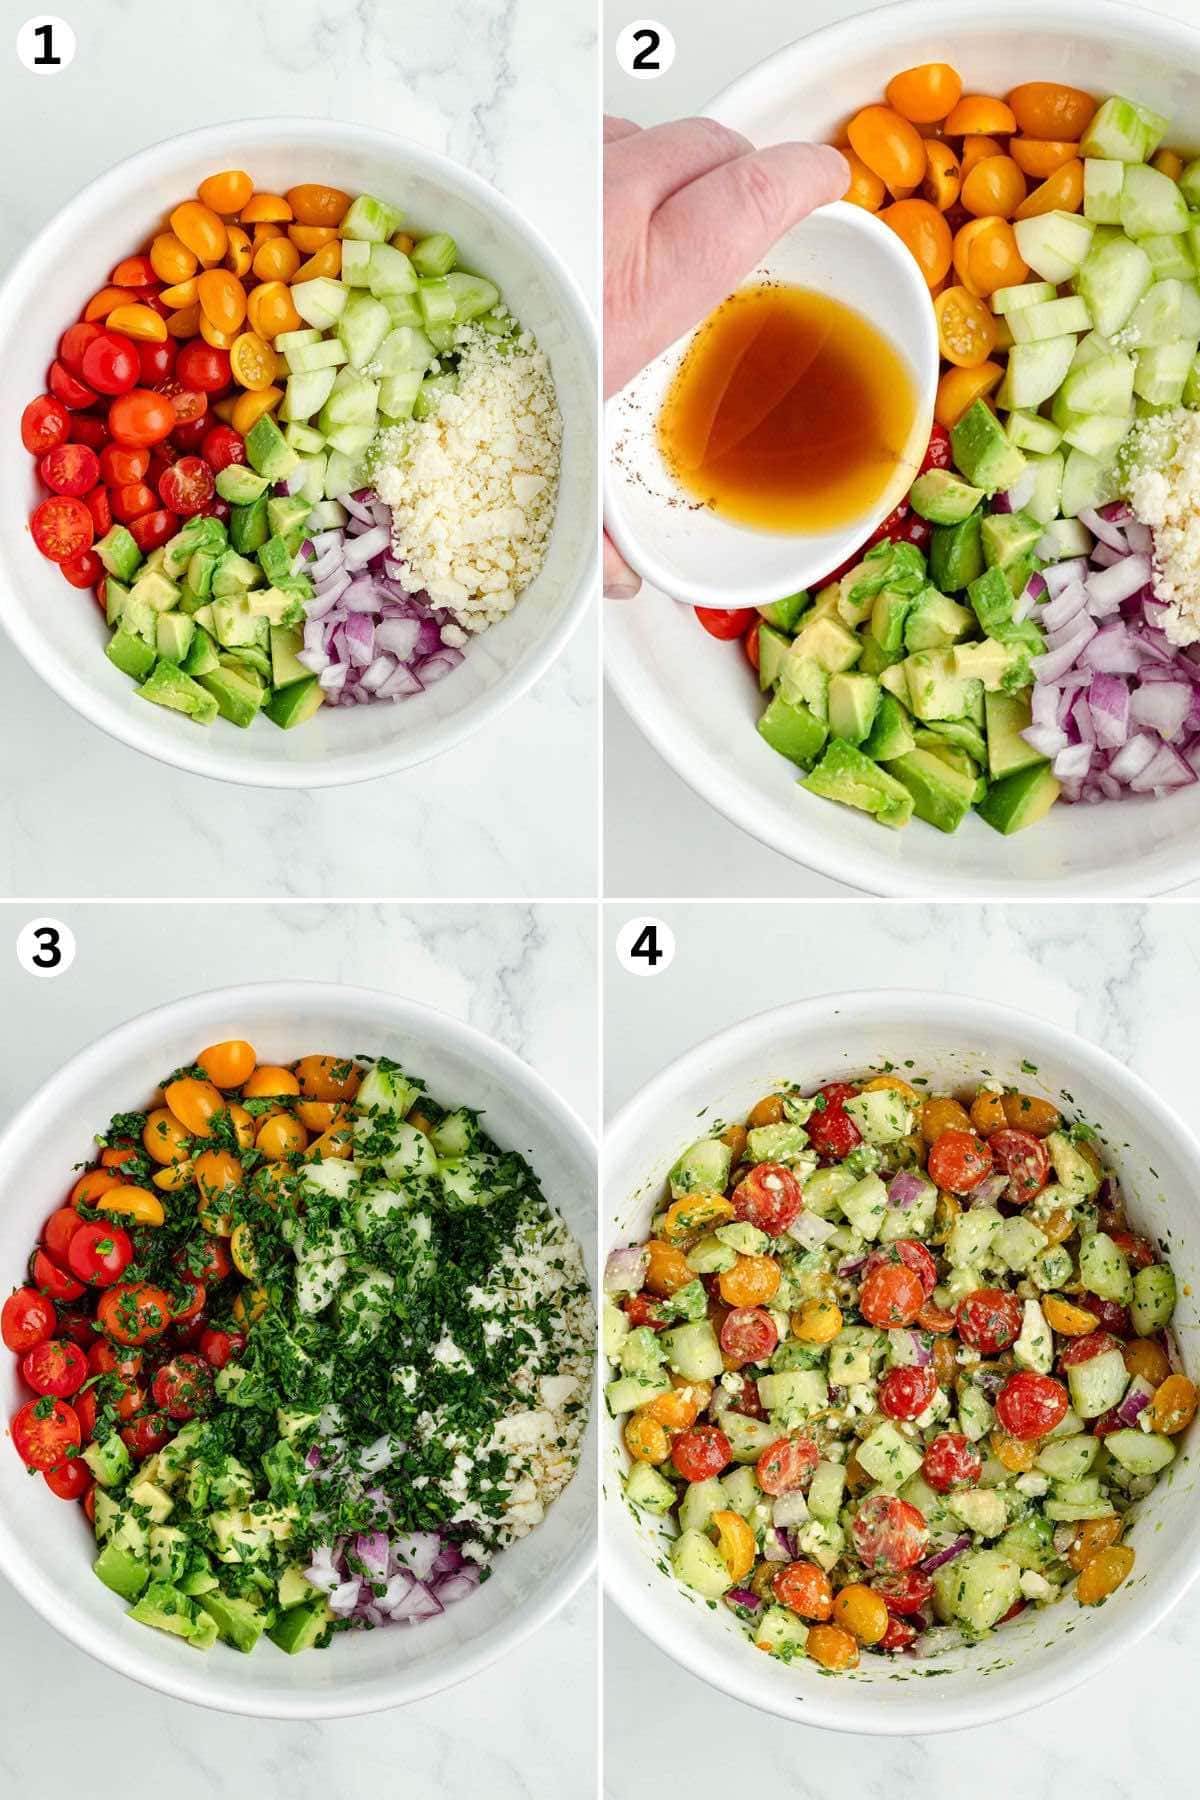 Place avocado, tomatoes, cucumbers, onion and feta cheese in a large salad bowl. Pour the dressing over salad. Top with fresh parsley. Toss to combine.